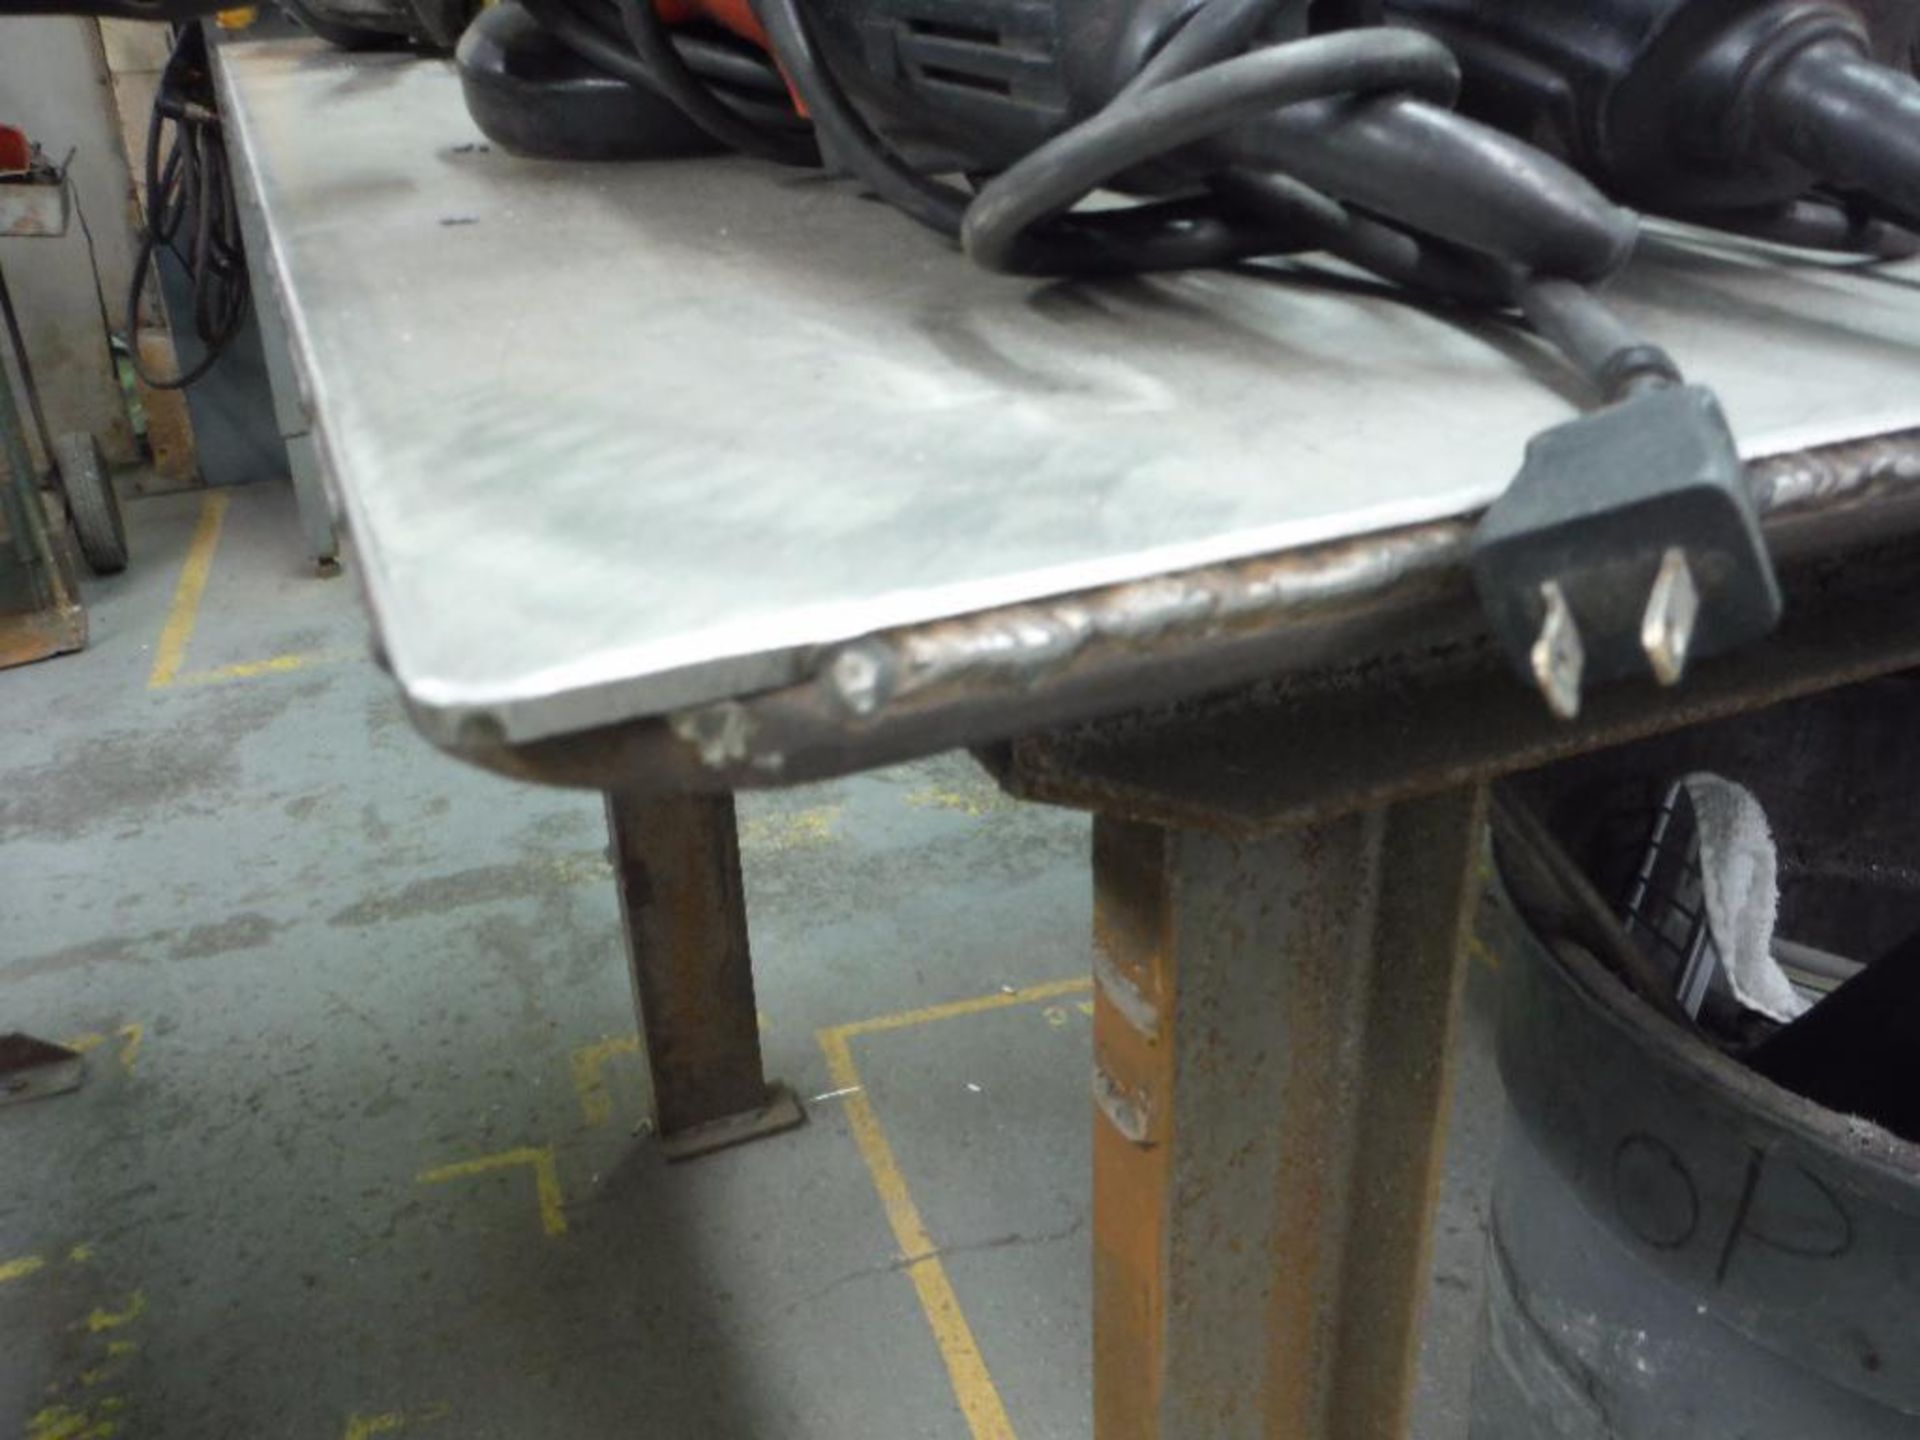 Carbon steel shop table, SS top, 96 in. long x 48 in. wide x 37 in. tall, with 2 table vices ** - Image 2 of 8